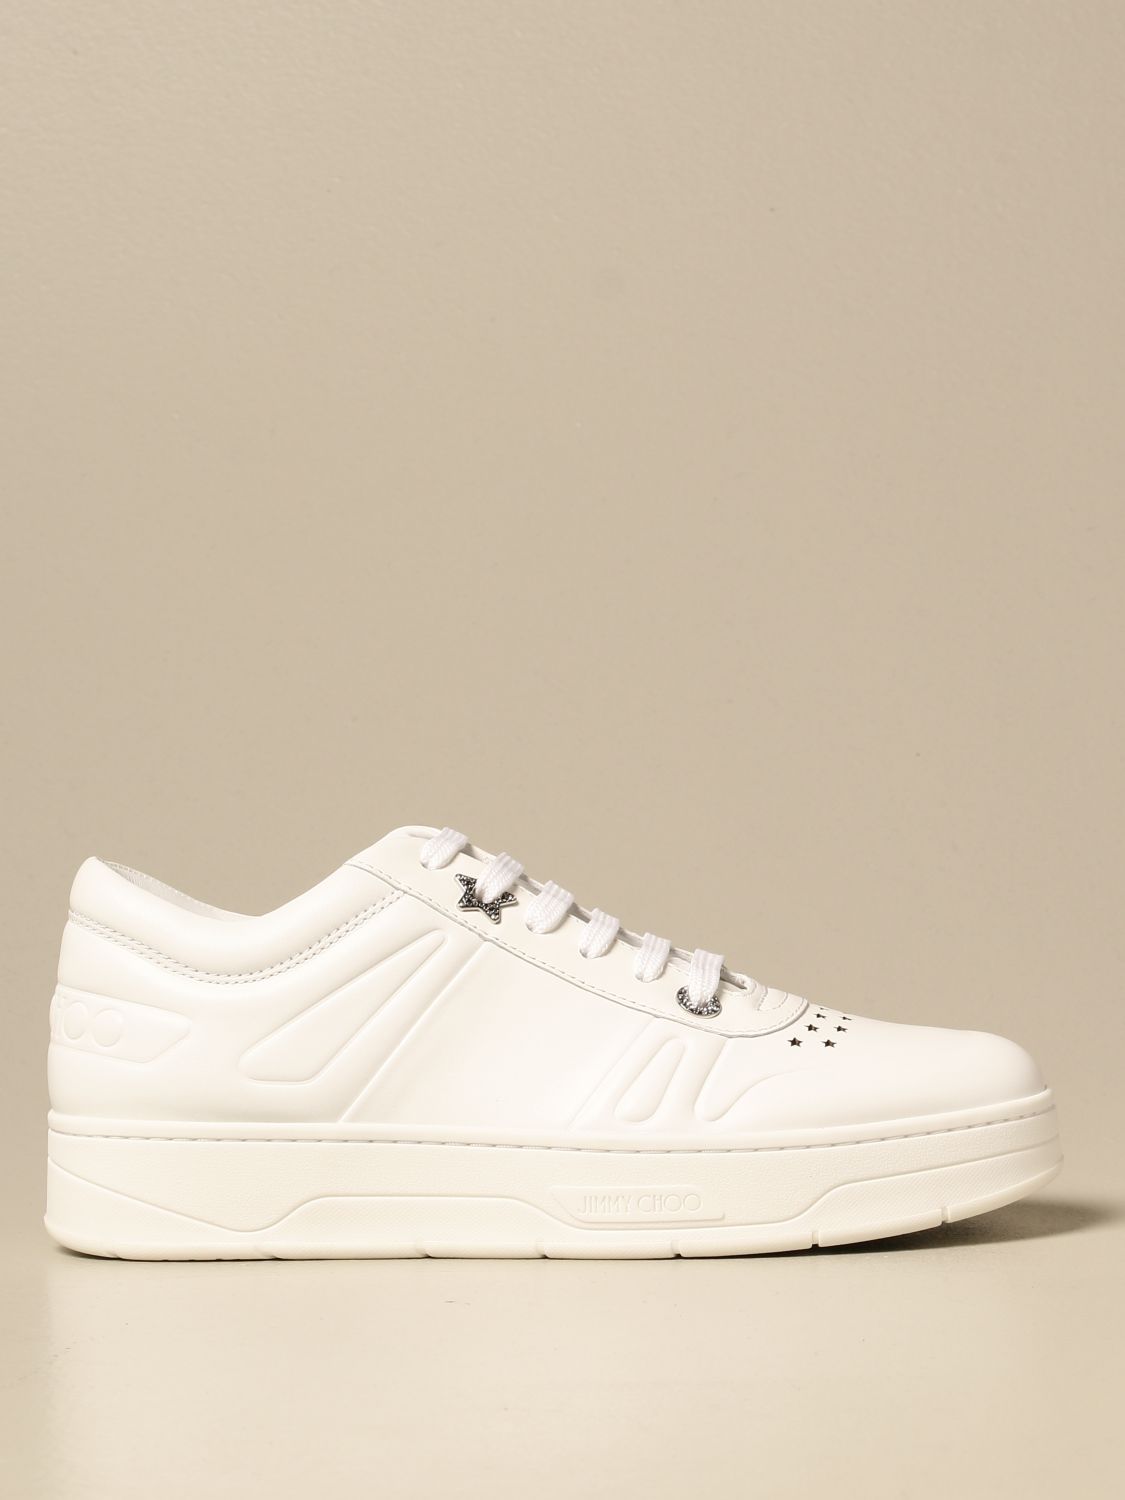 Hawaii / F Jimmy Choo sneakers in leather with stars